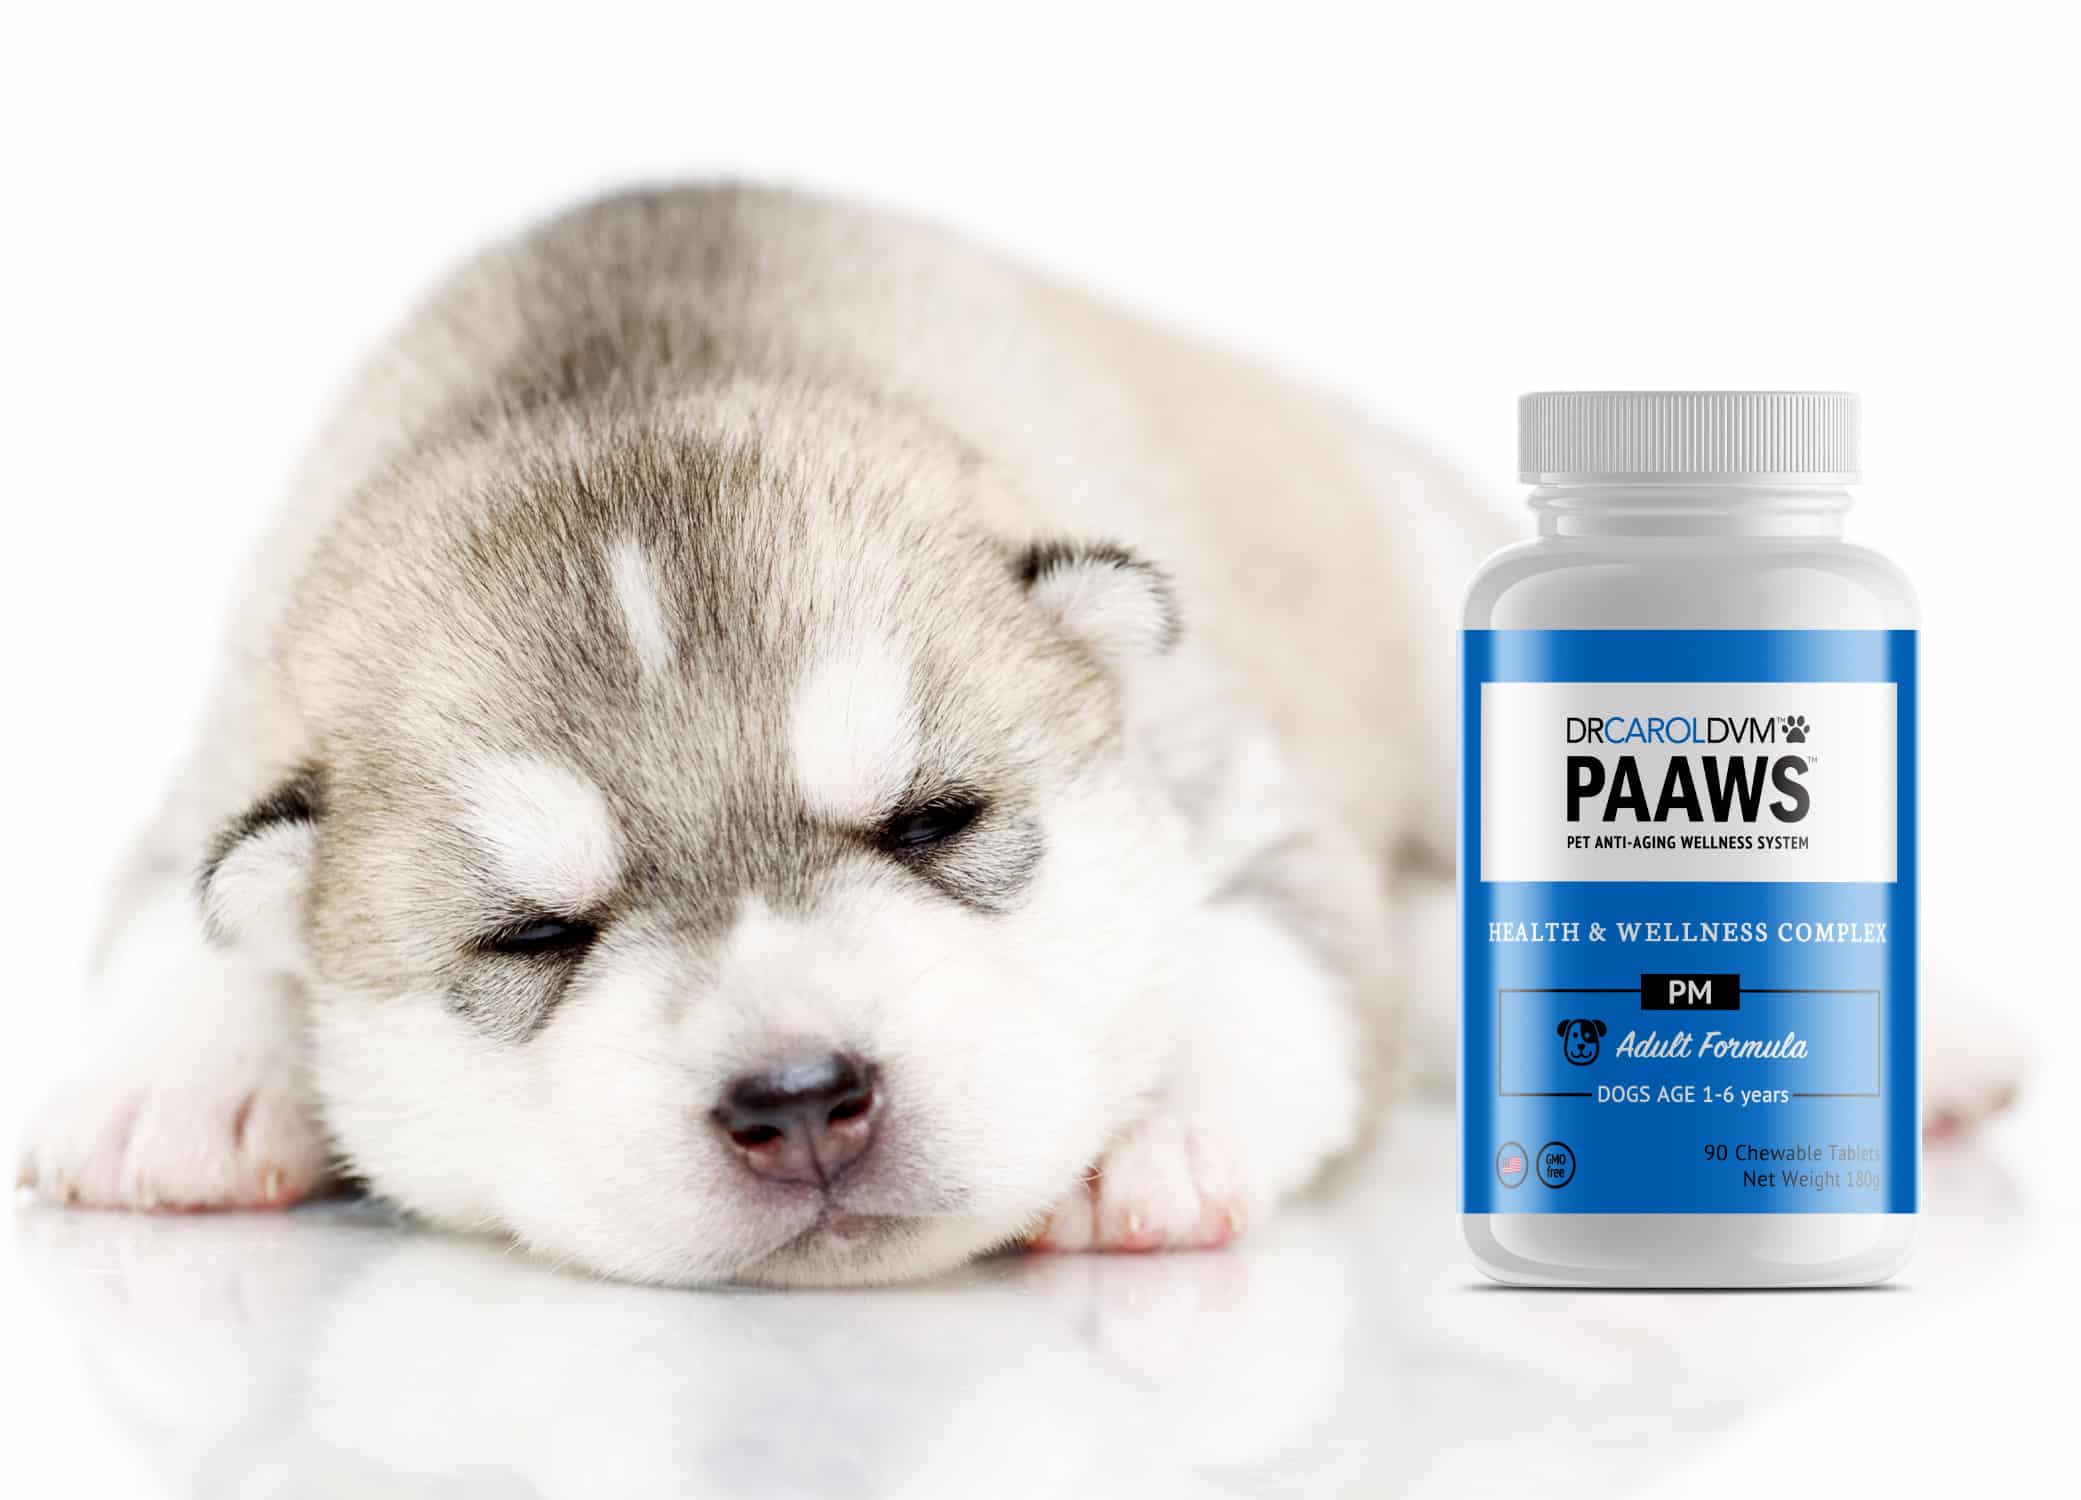 Dr. Carol DVM PAAWS pet product labels supplement bottle design in white, blue, black with friendly dog sleeping next to the bottle.